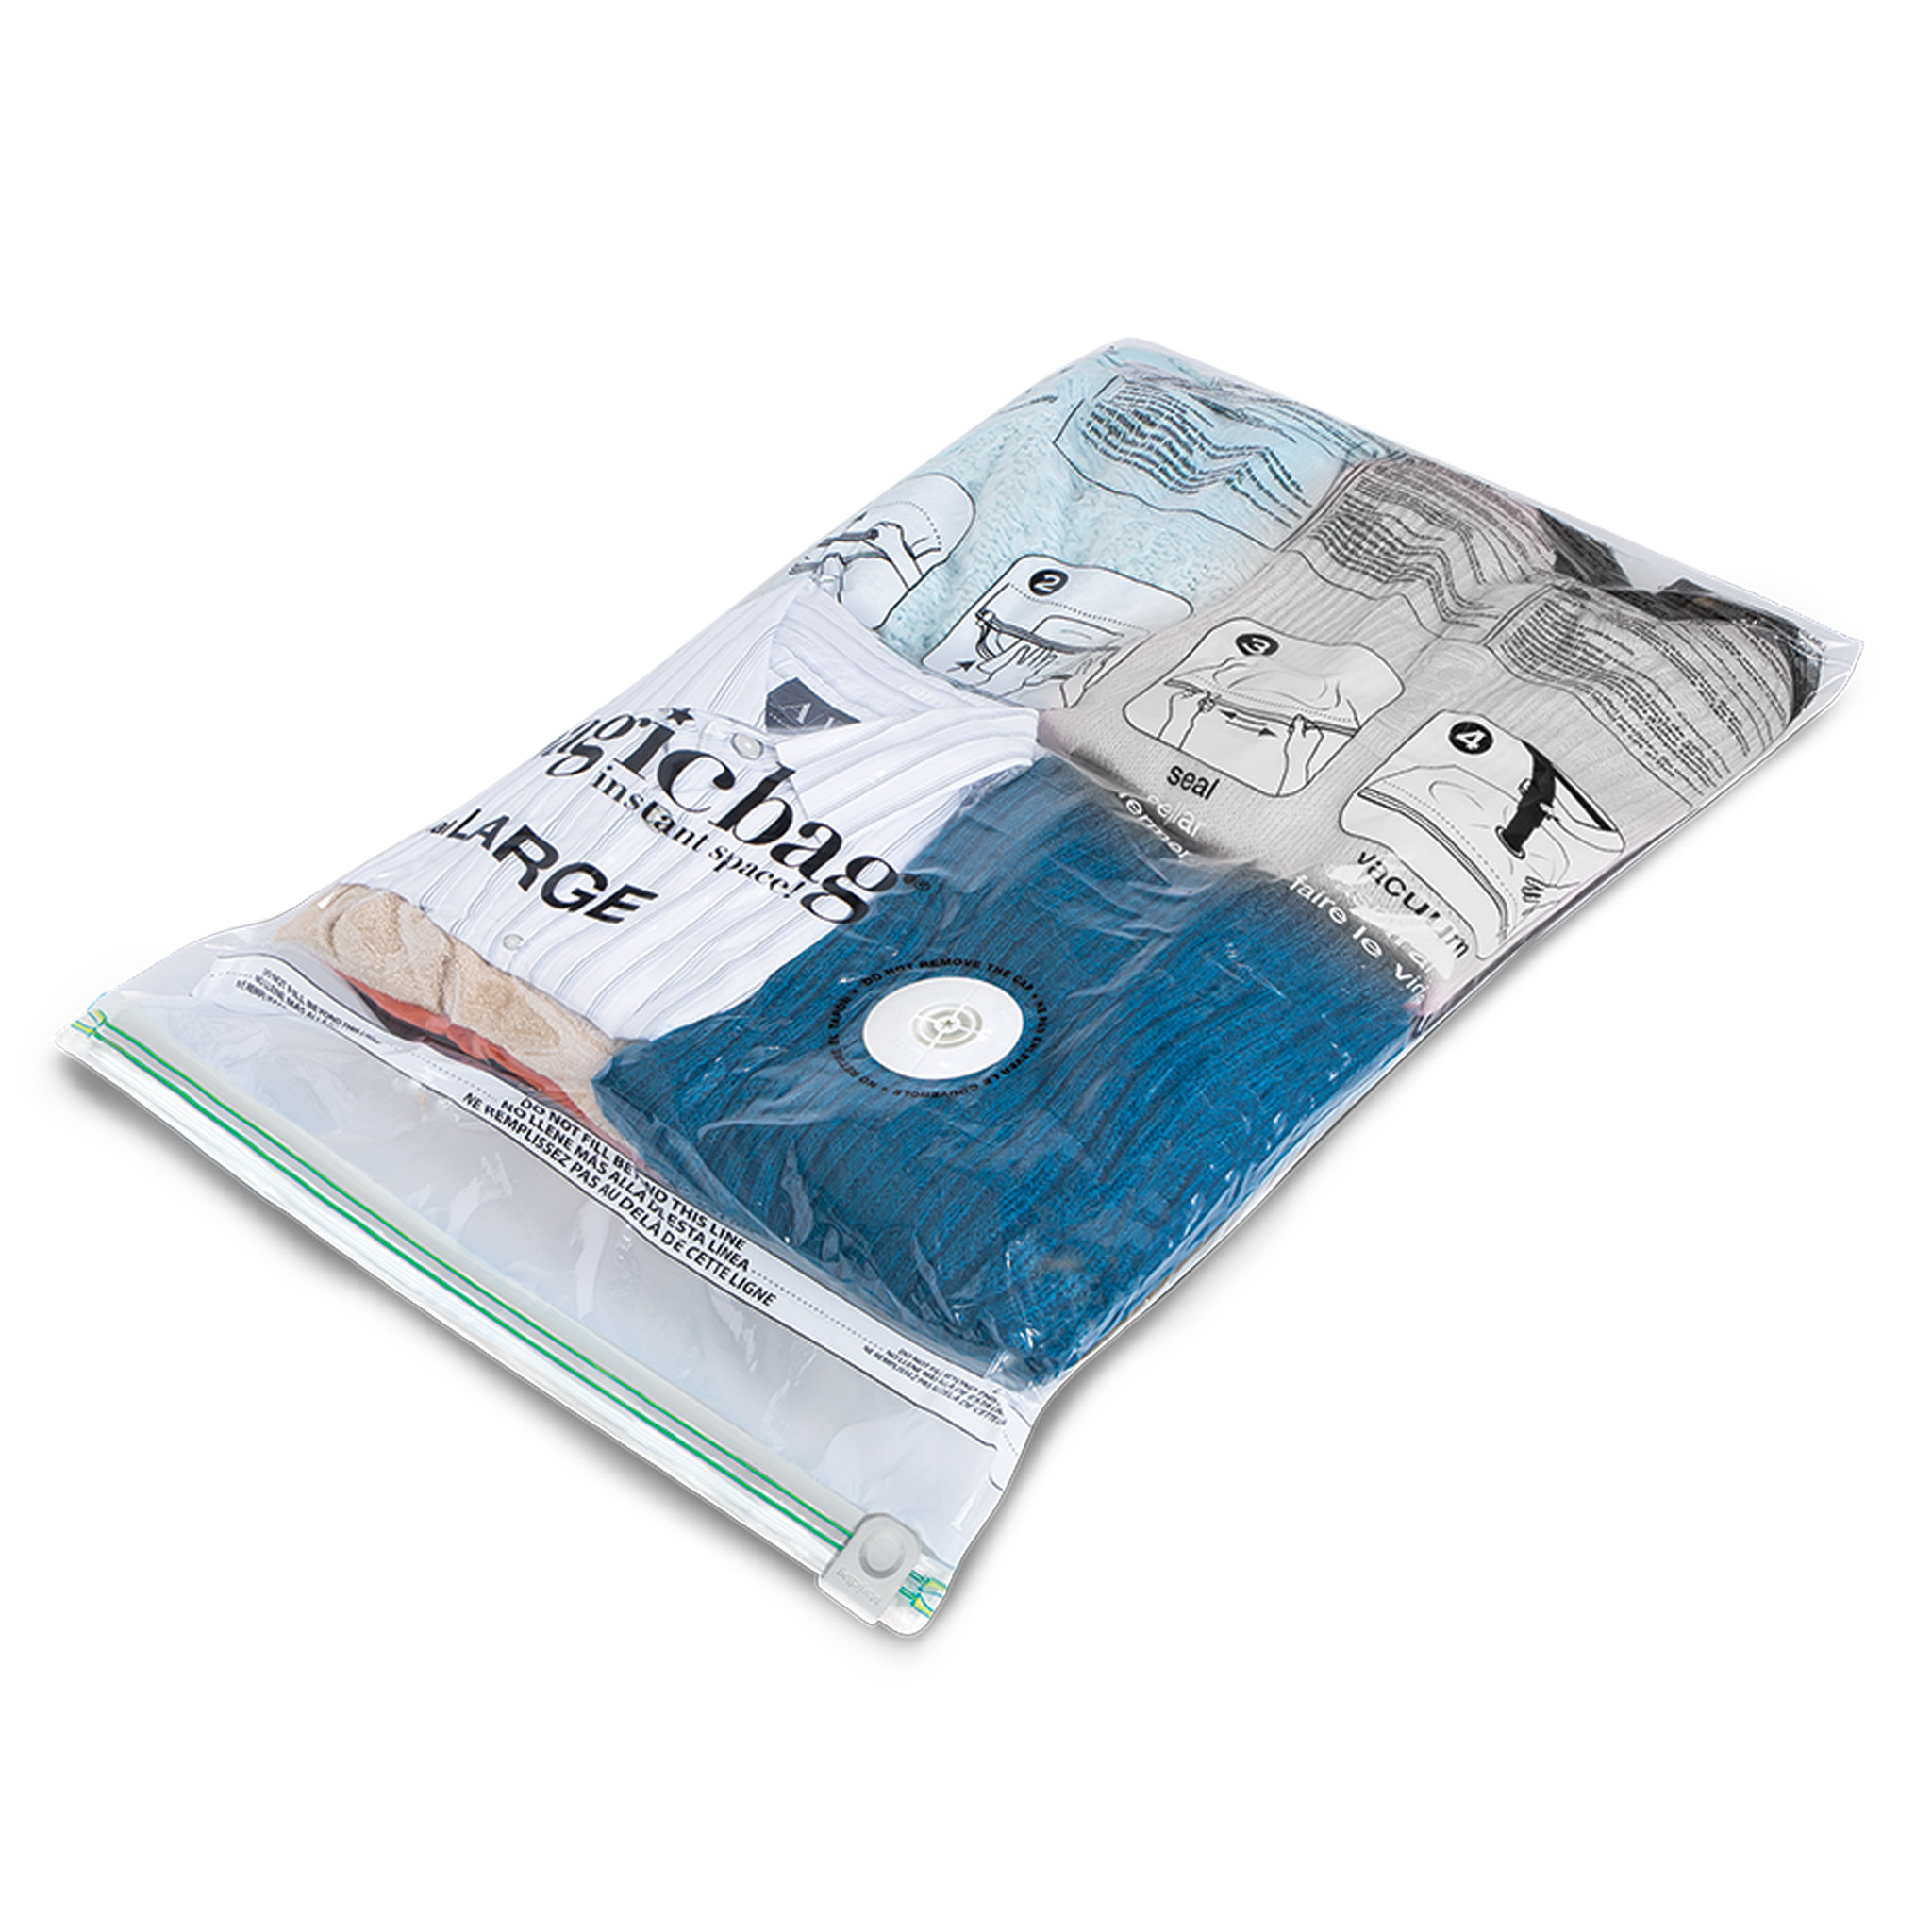 These Vacuum Storage Bags Are on Sale at